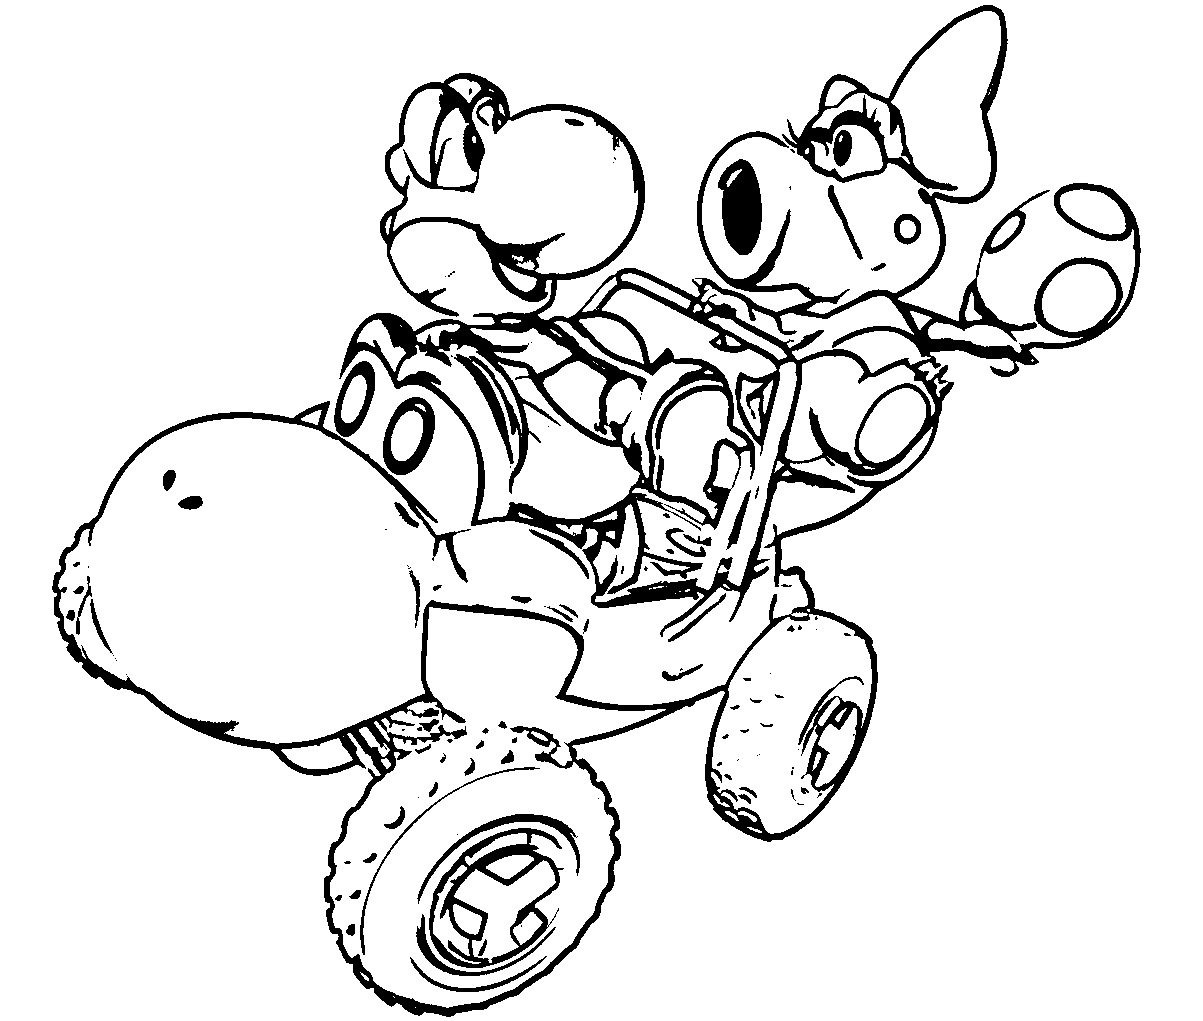 mario-cart-coloring-pages-coloring-pages-kids